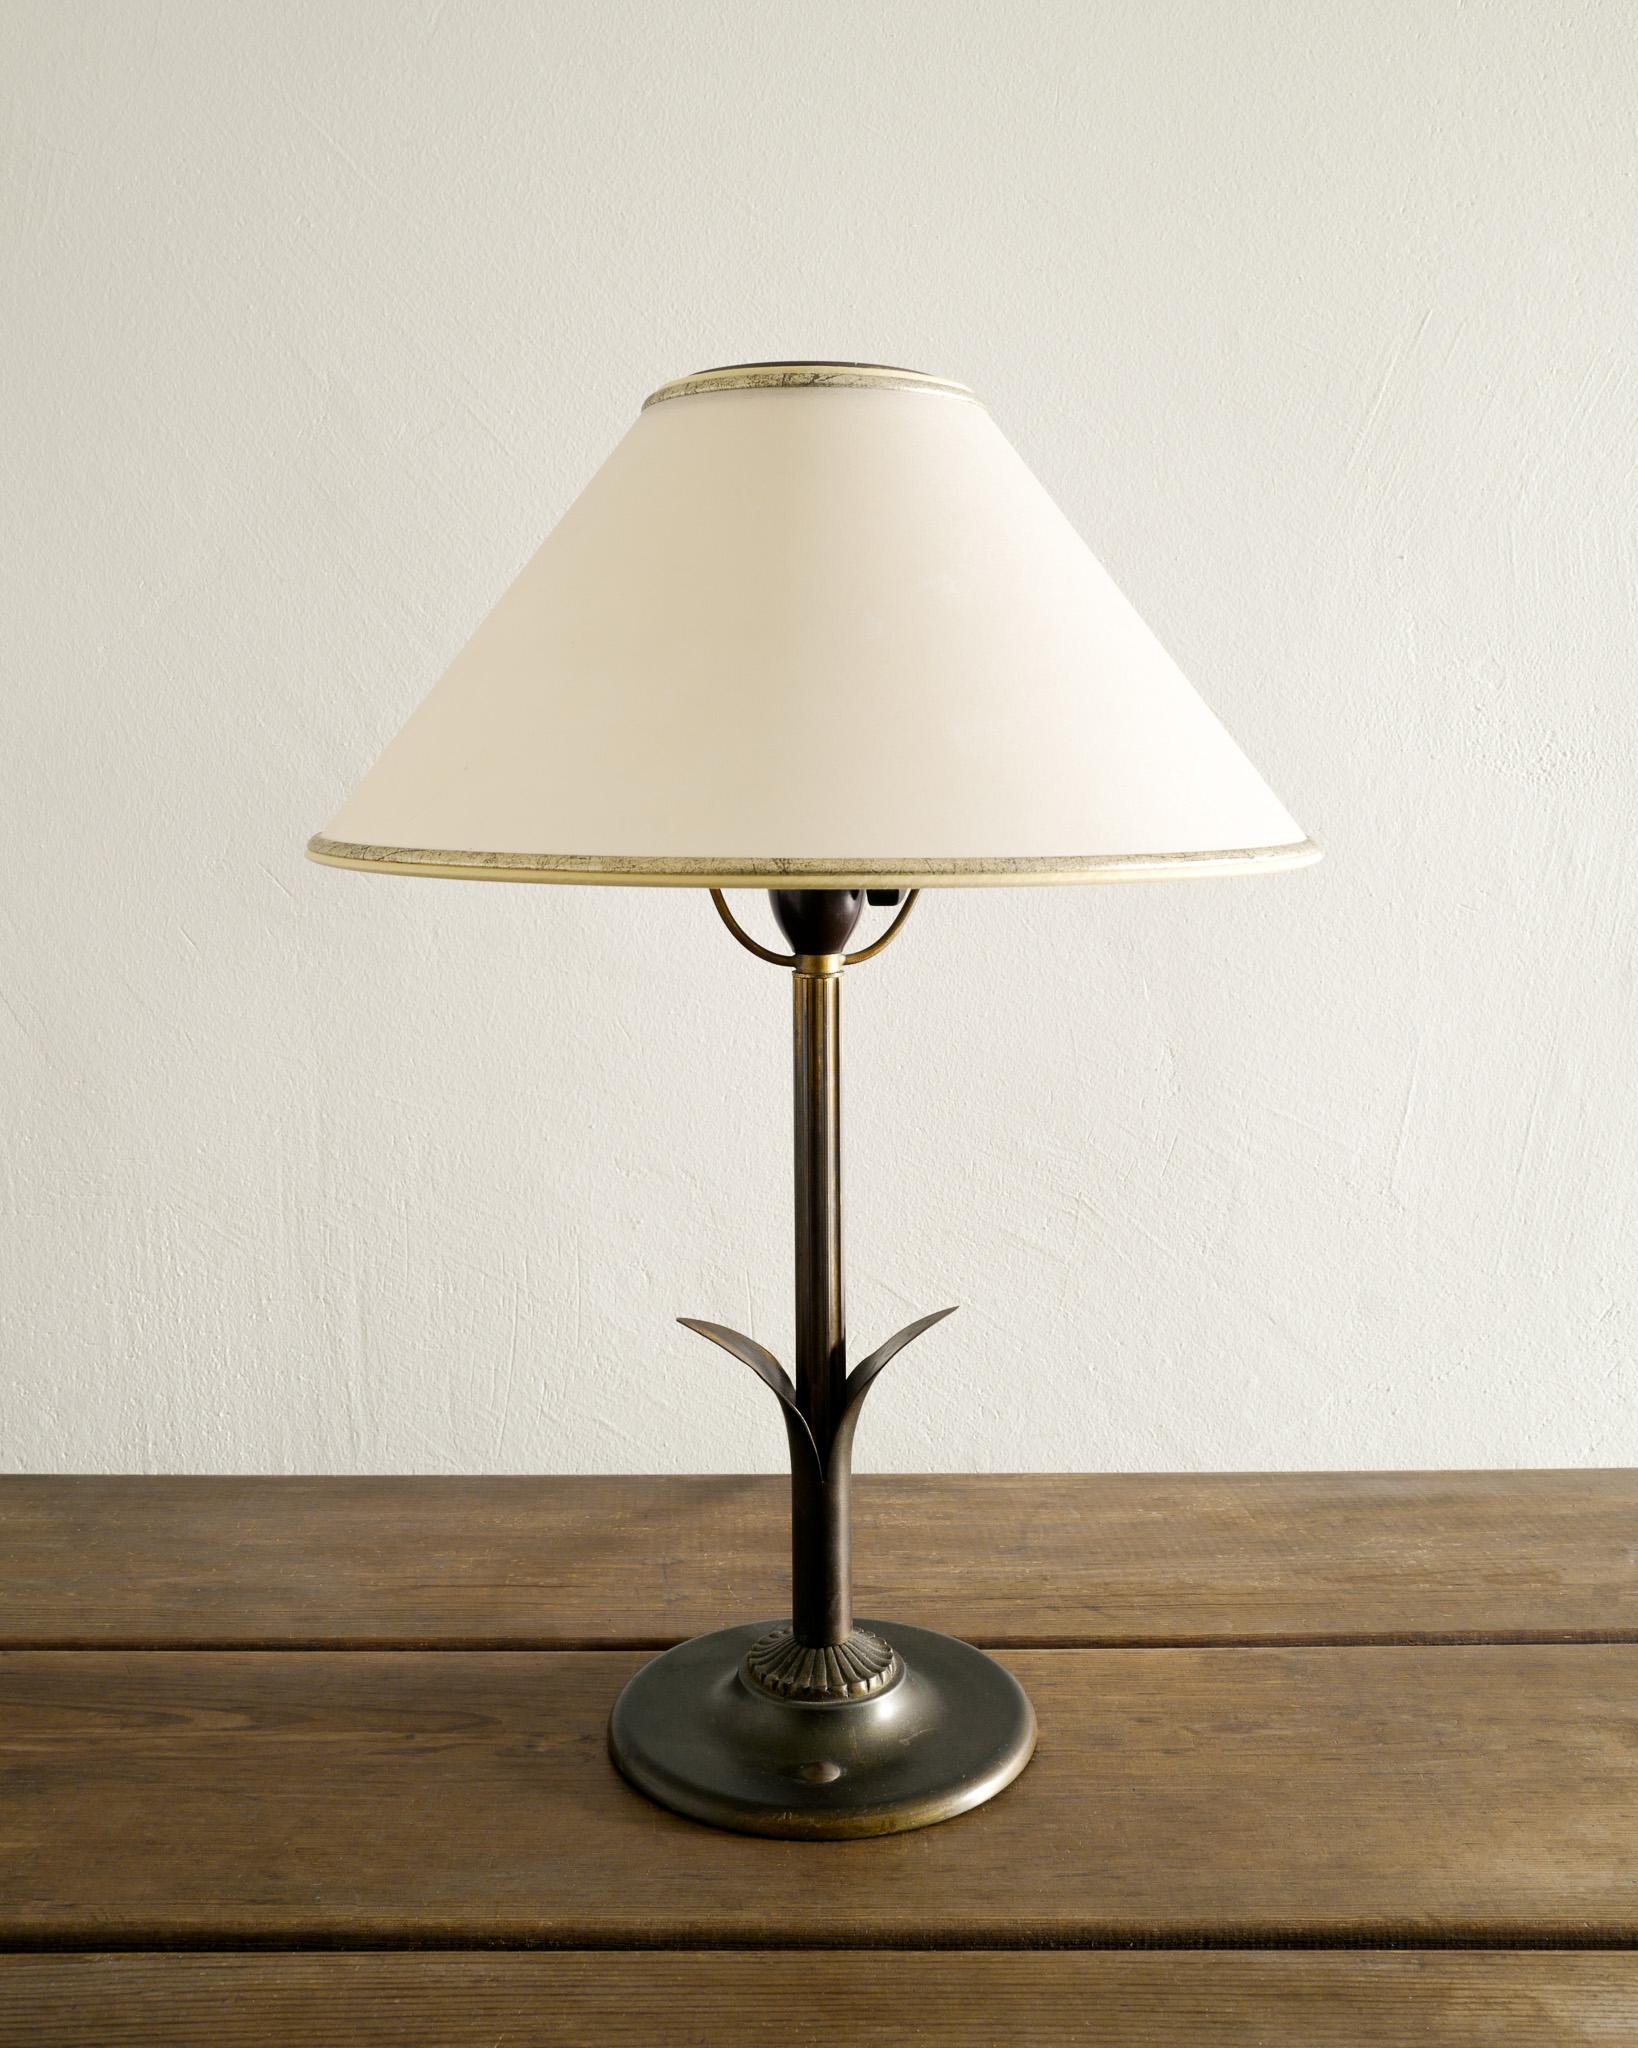 Rare decorative Danish mid century art déco table lamp in solid bronze with the original shade produced by unknown designer in Denmark 1930s. Working well and in good original condition. 

Dimensions: H: 49 cm / 19.50